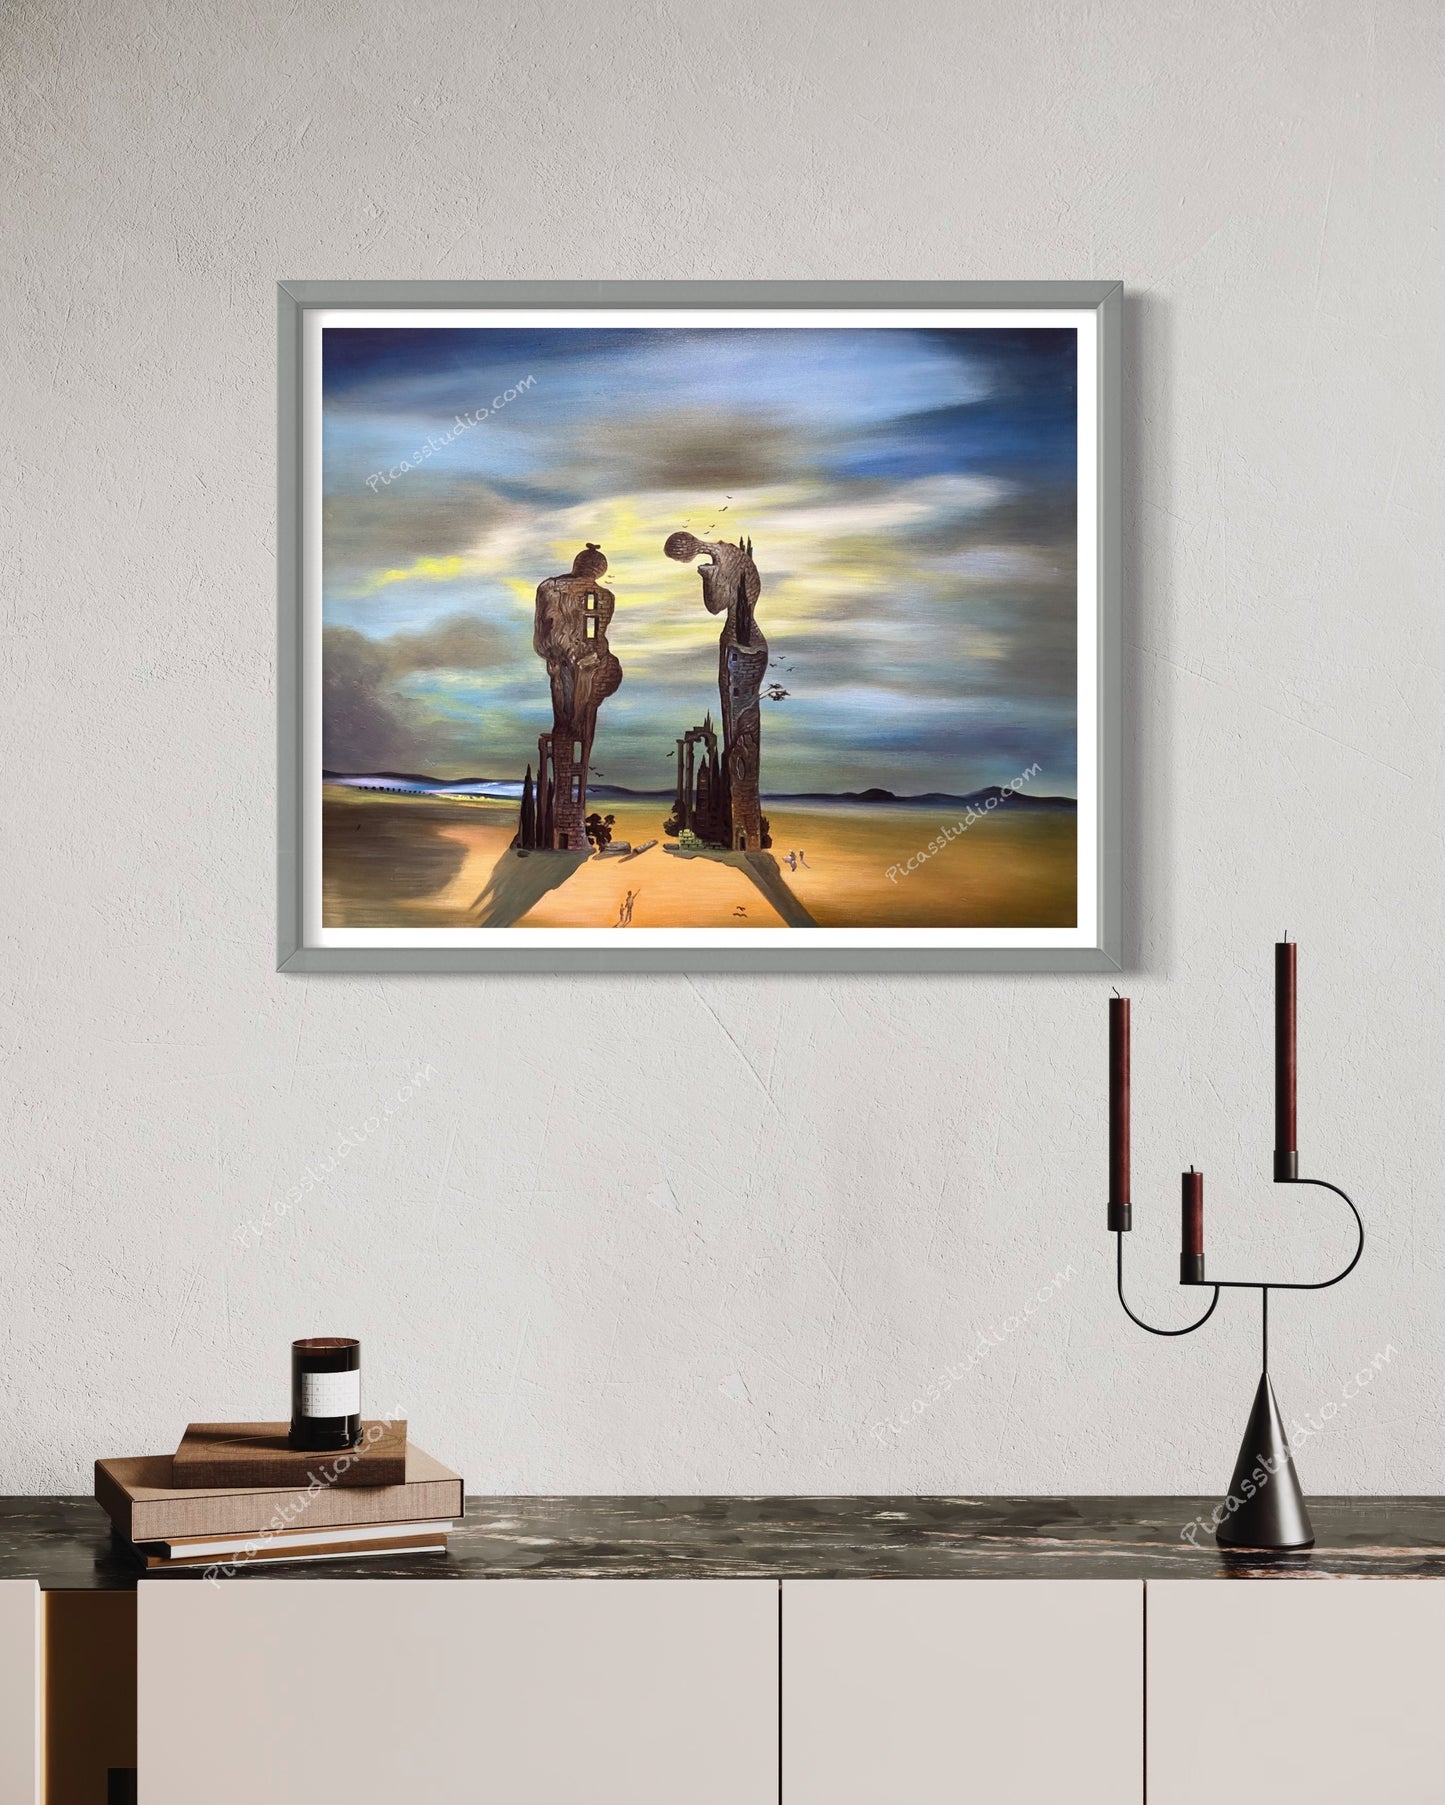 Archeological Reminiscence Millet's Angelus Salvador Dali Landscape Hand Painted Art on Canvas Wall Decor Unframed